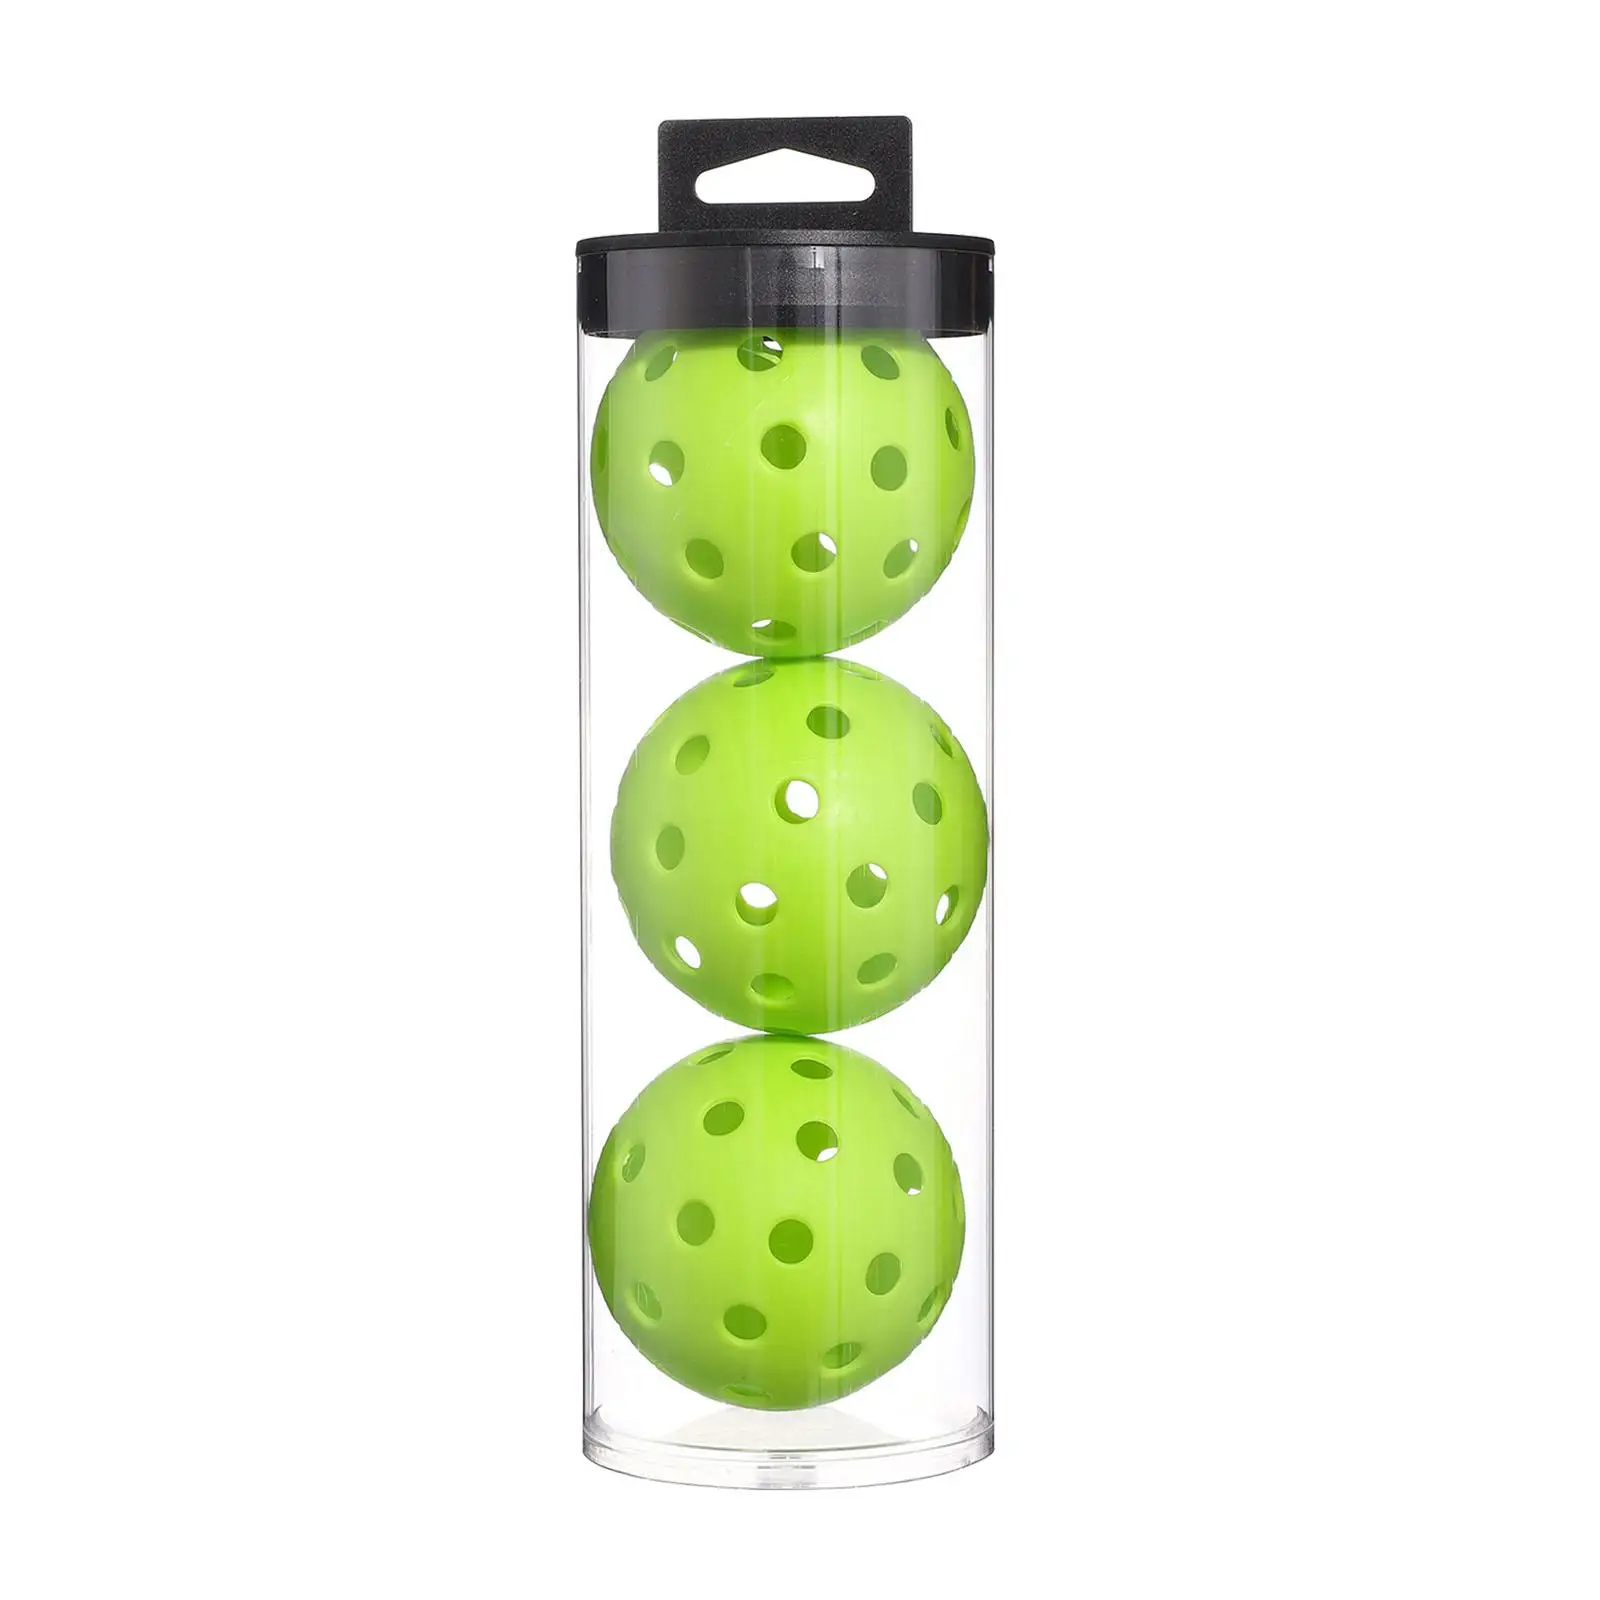 3x Pickleball Ball Practice Toy Ball for Outdoor Indoor Practice Training